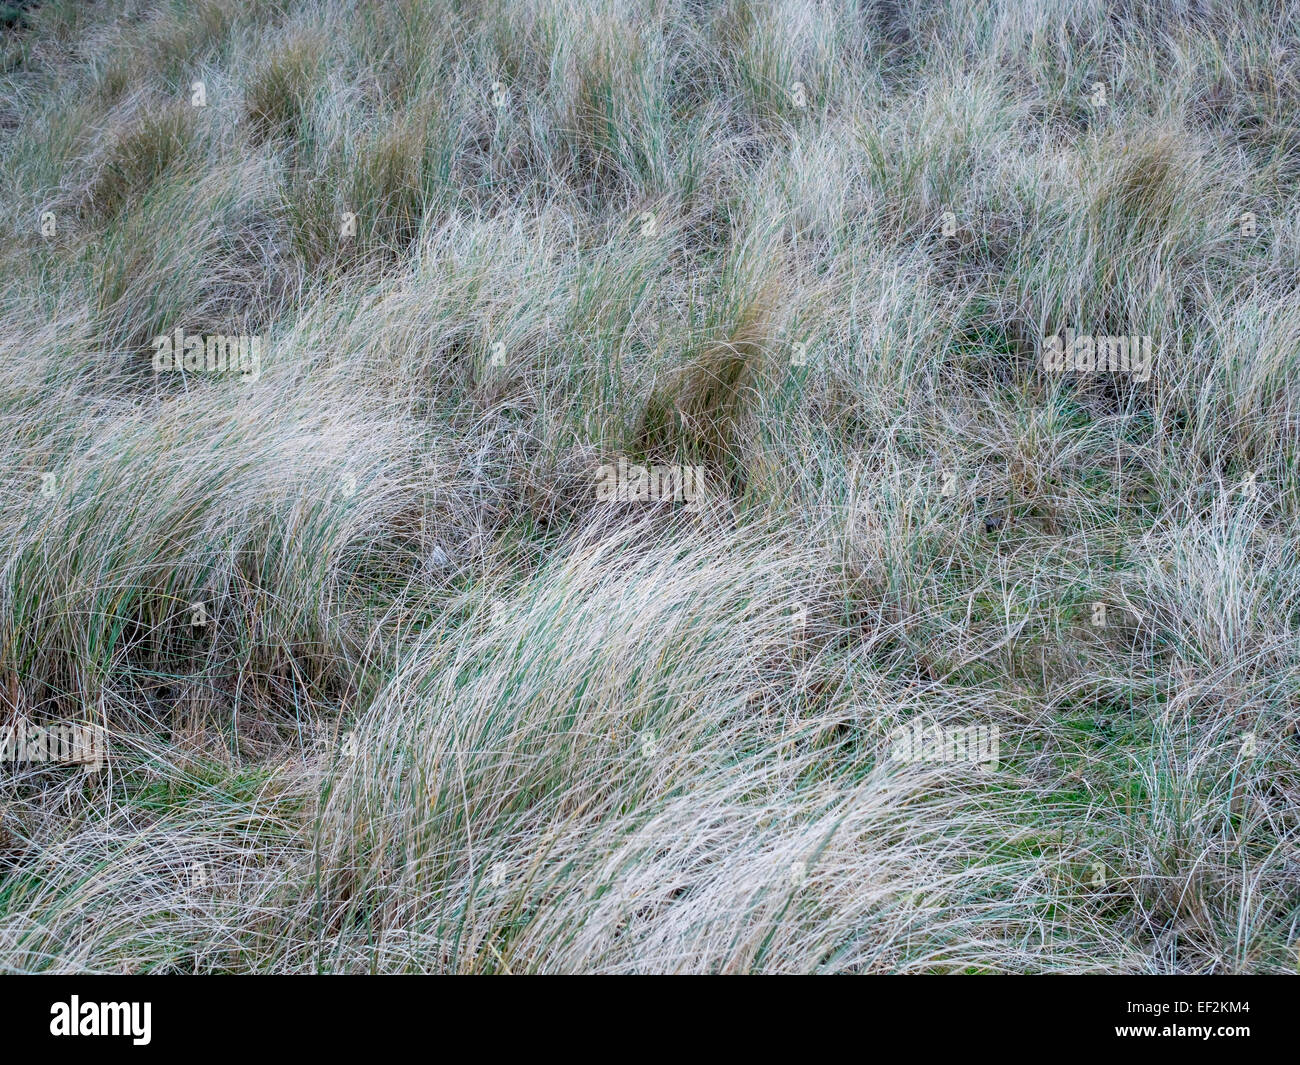 Grass growing on sand dunes in winter has lost almost all of its colour Stock Photo